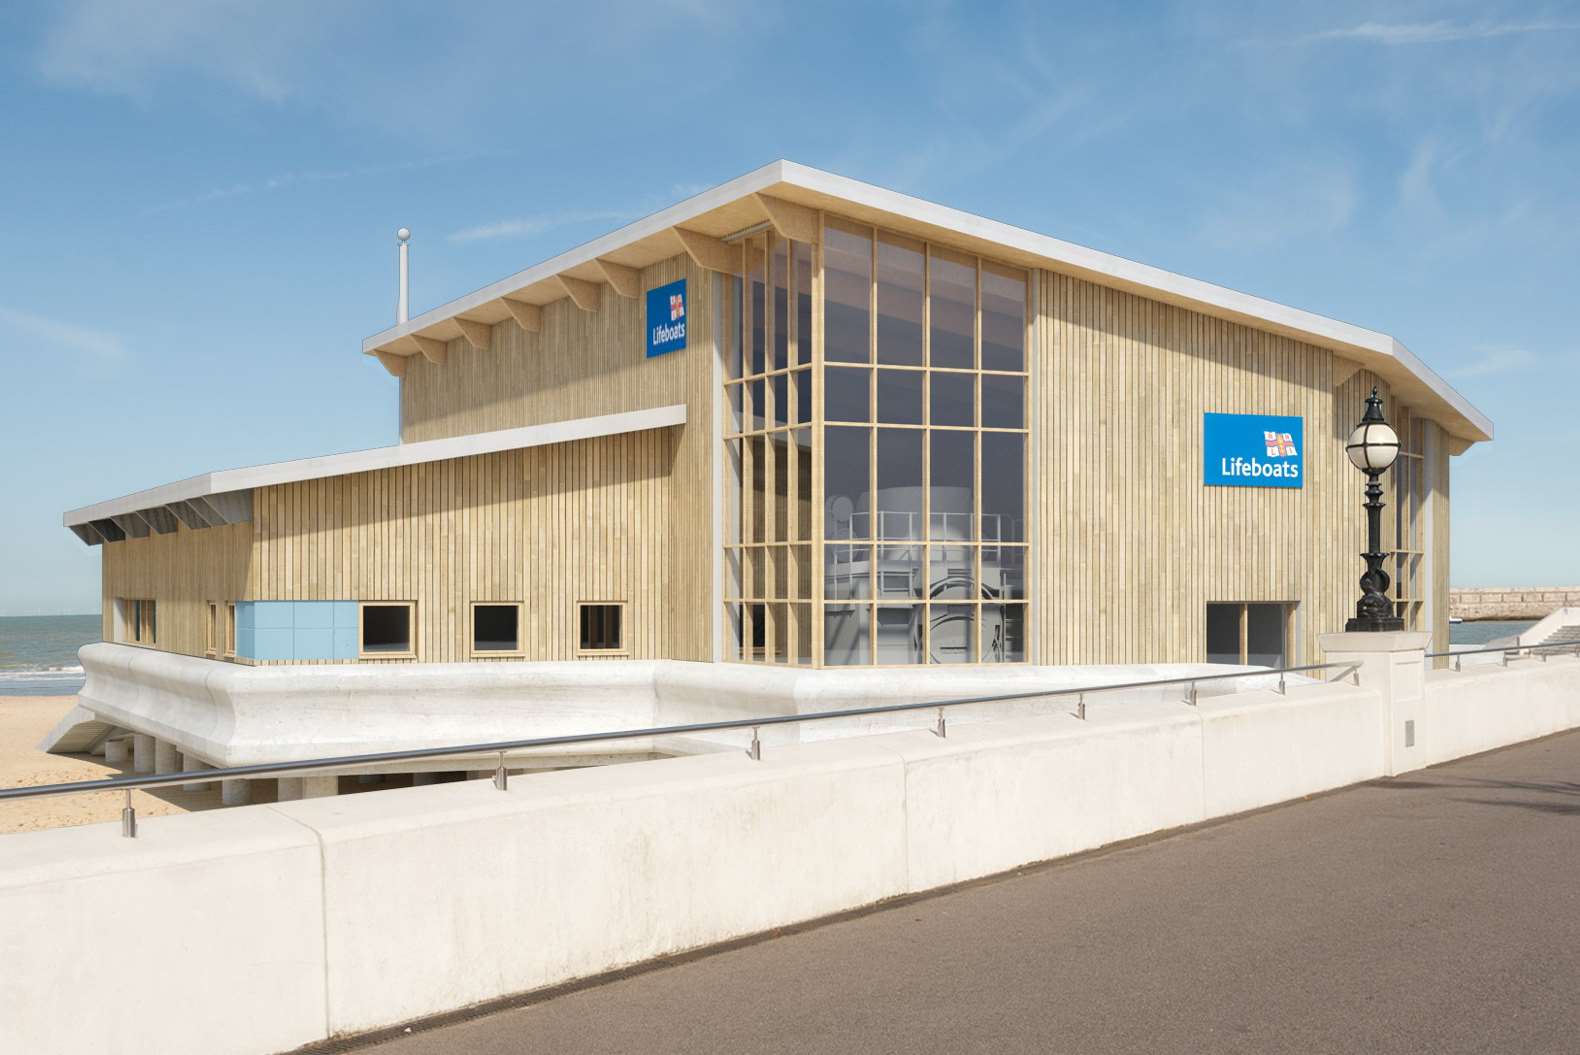 Studio Four Architects impression of Margate RNLI's new lifeboat station.